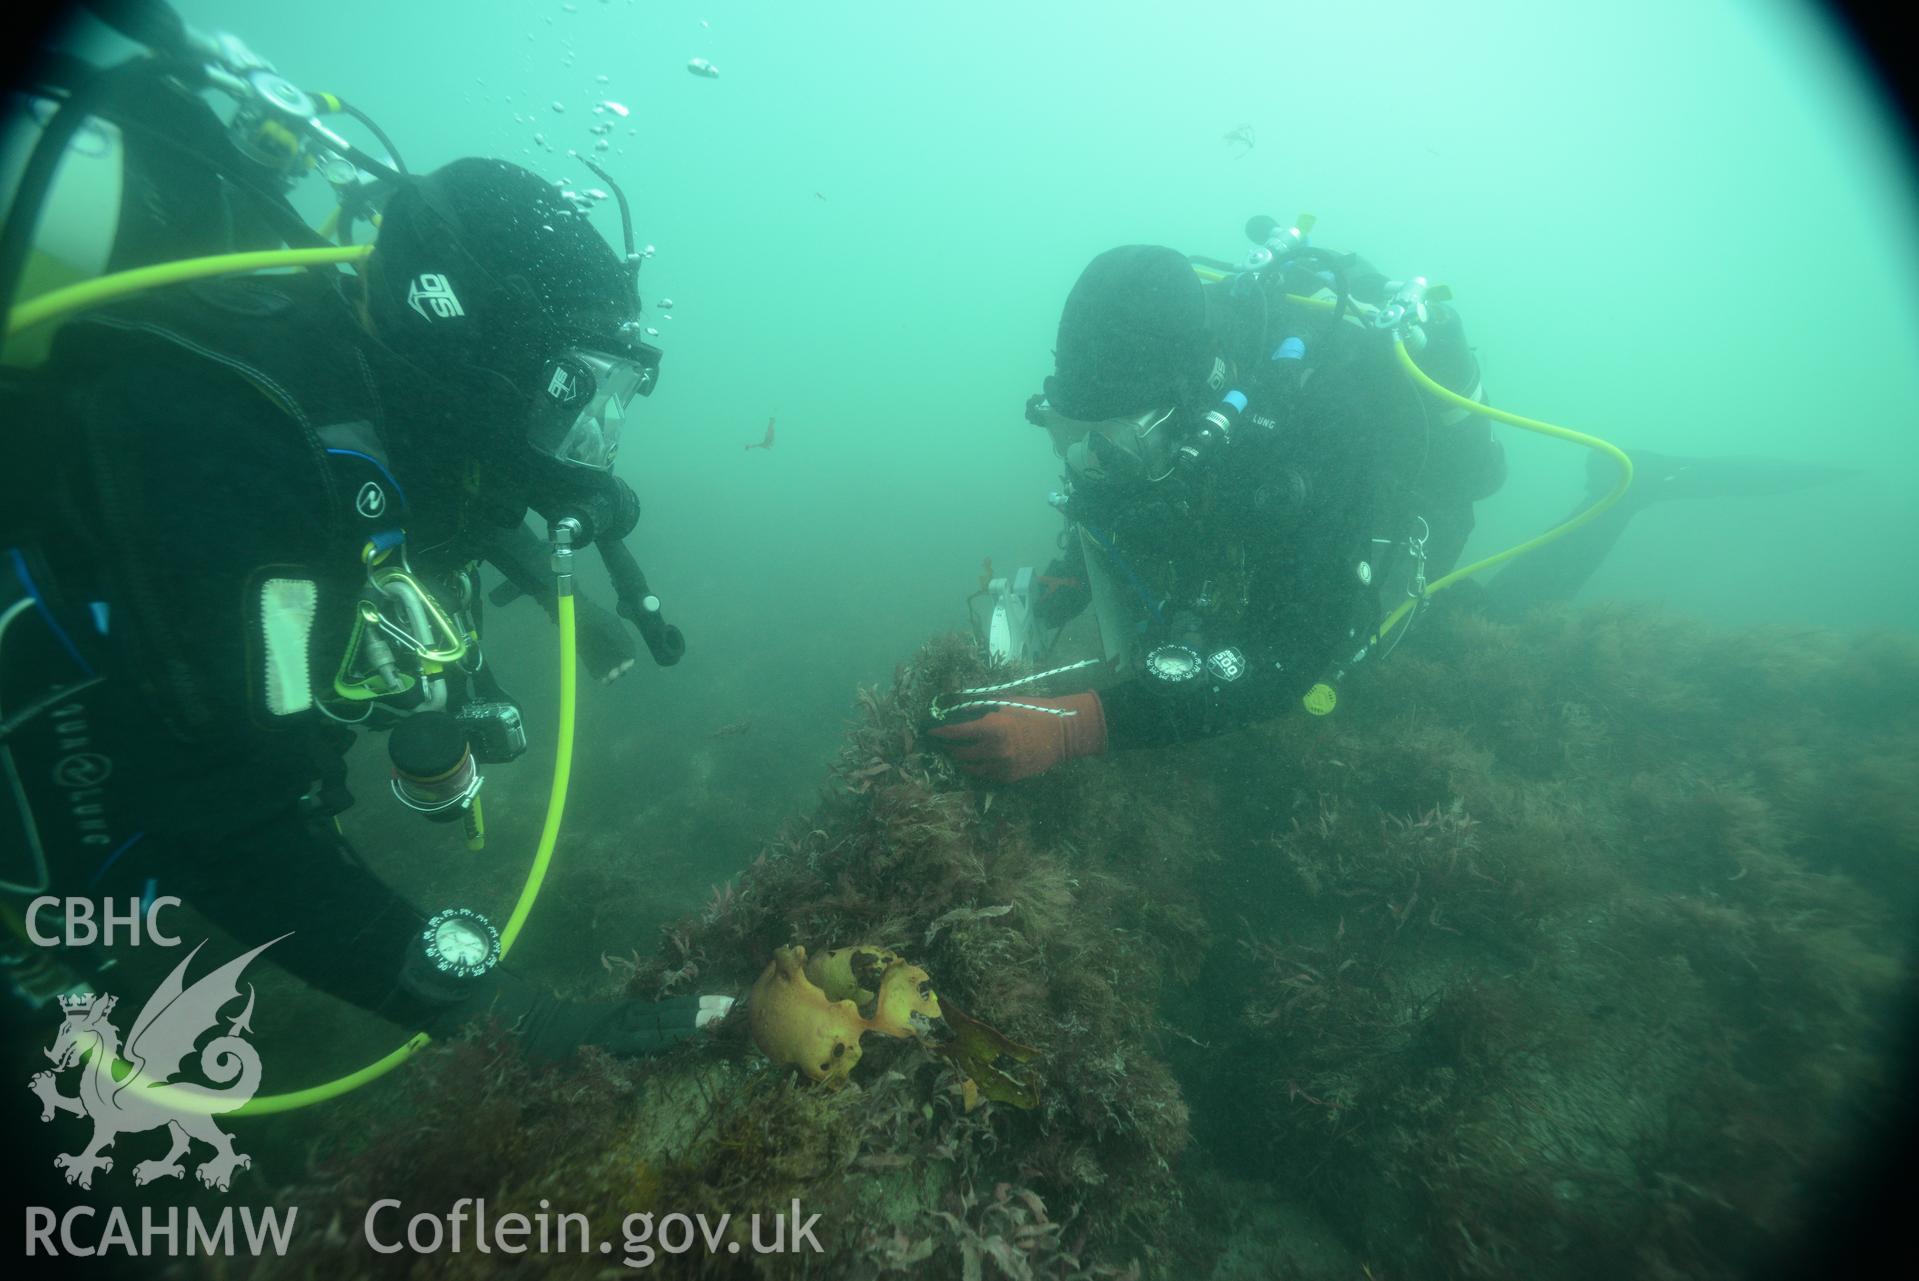 Divers working on survey of the Bronze Bell wreck, Tal-y-Bont. Undertaken by MSDS Marine on behalf of RCAHMW, through the EU Funded CHERISH Project.